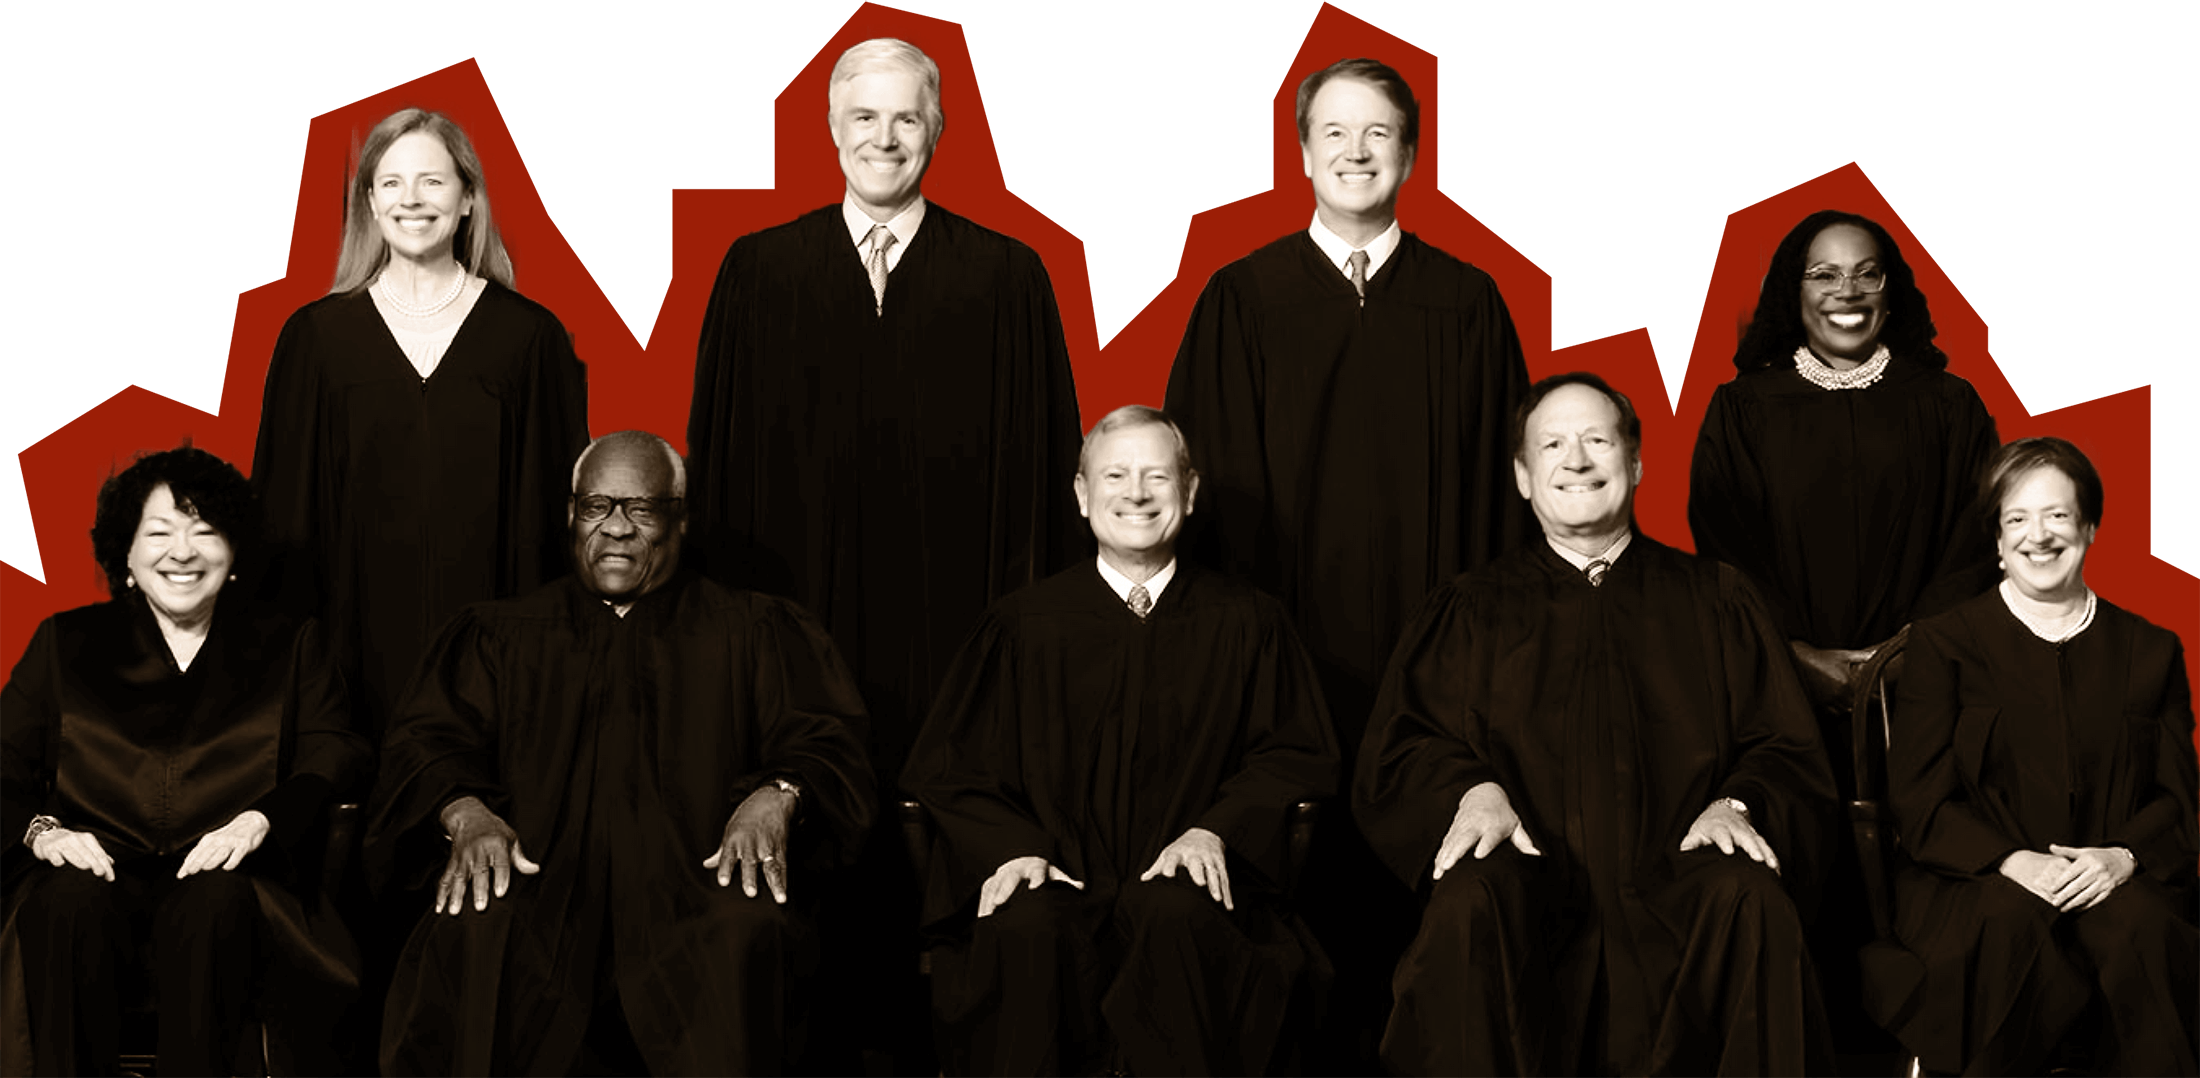 All nine justices lined up